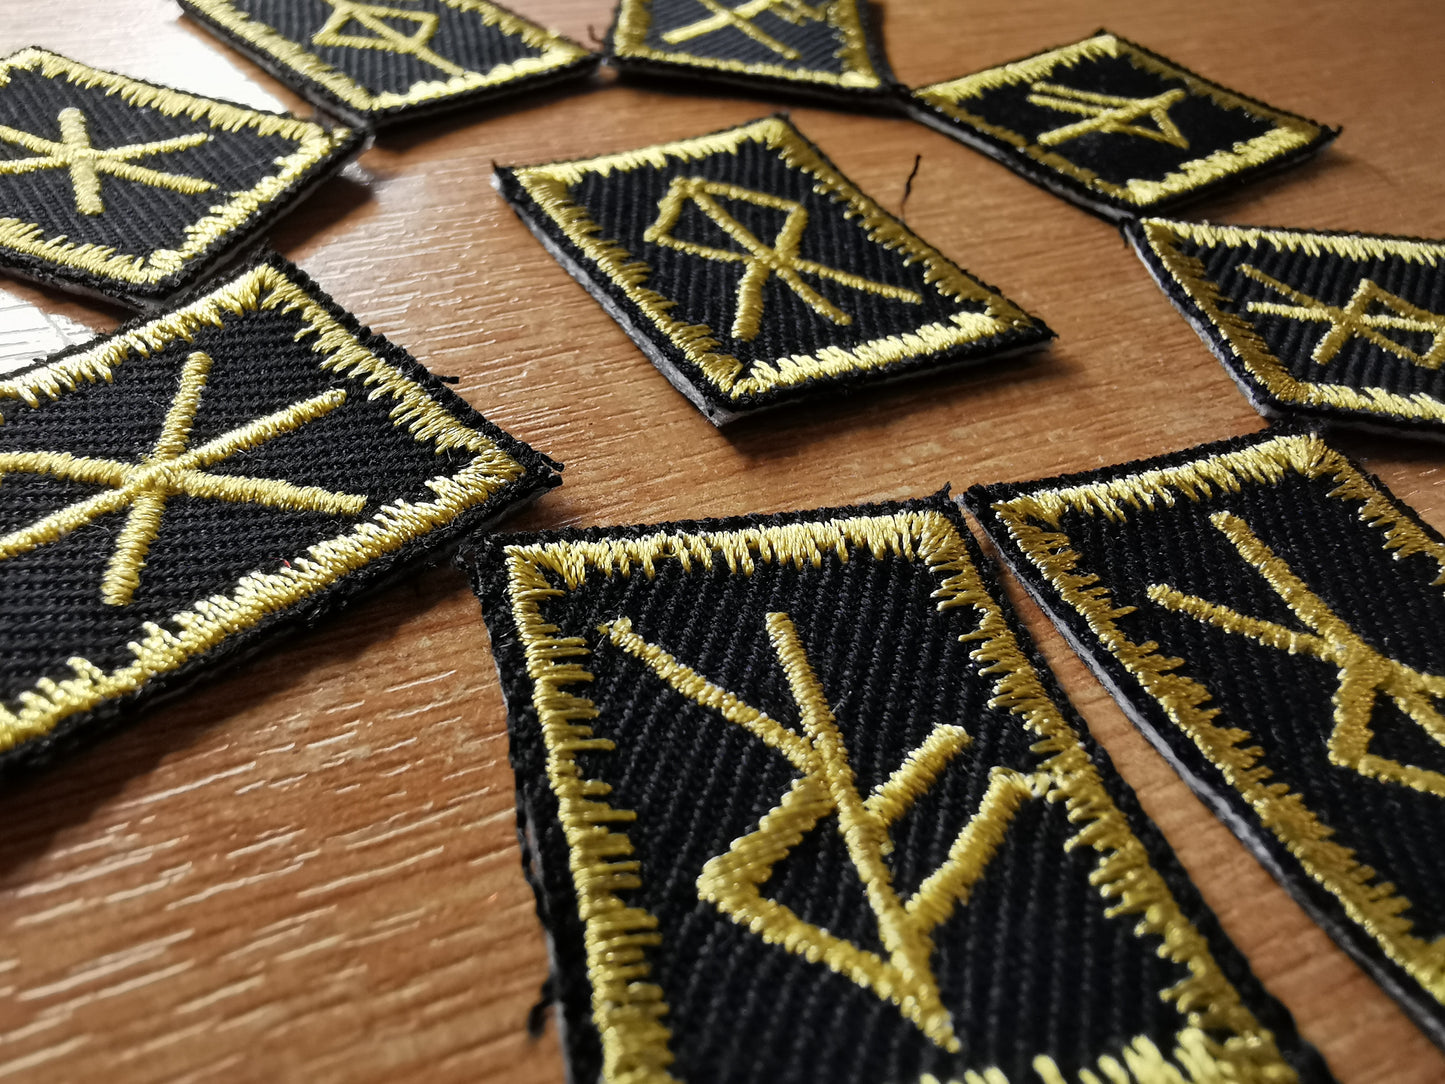 Gold Bindrune Patches Embroidered Viking Norse Heathenry Bind Runes